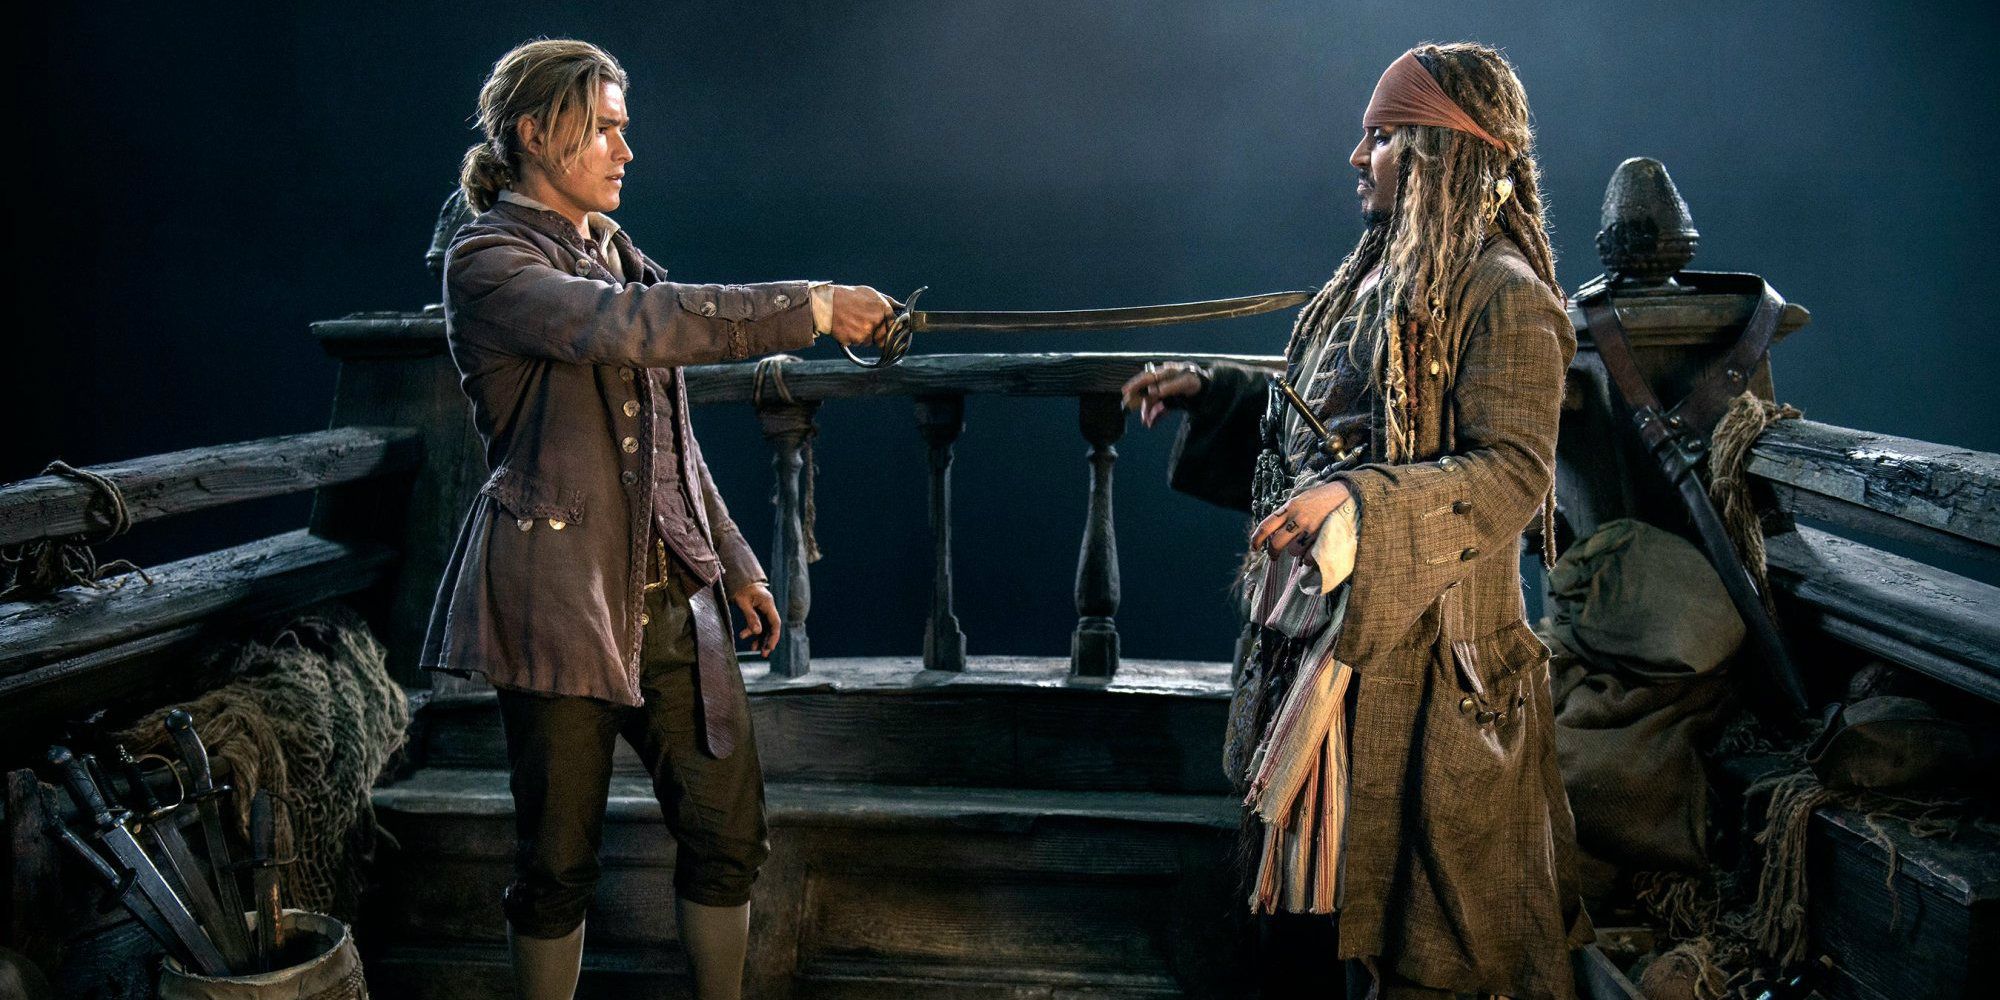 Brenton Thwaites as Henry Turner pointing a sword at Johnny Depp as Jack Sparrow in Pirates of the Caribbean: Dead Men Tell No Tales